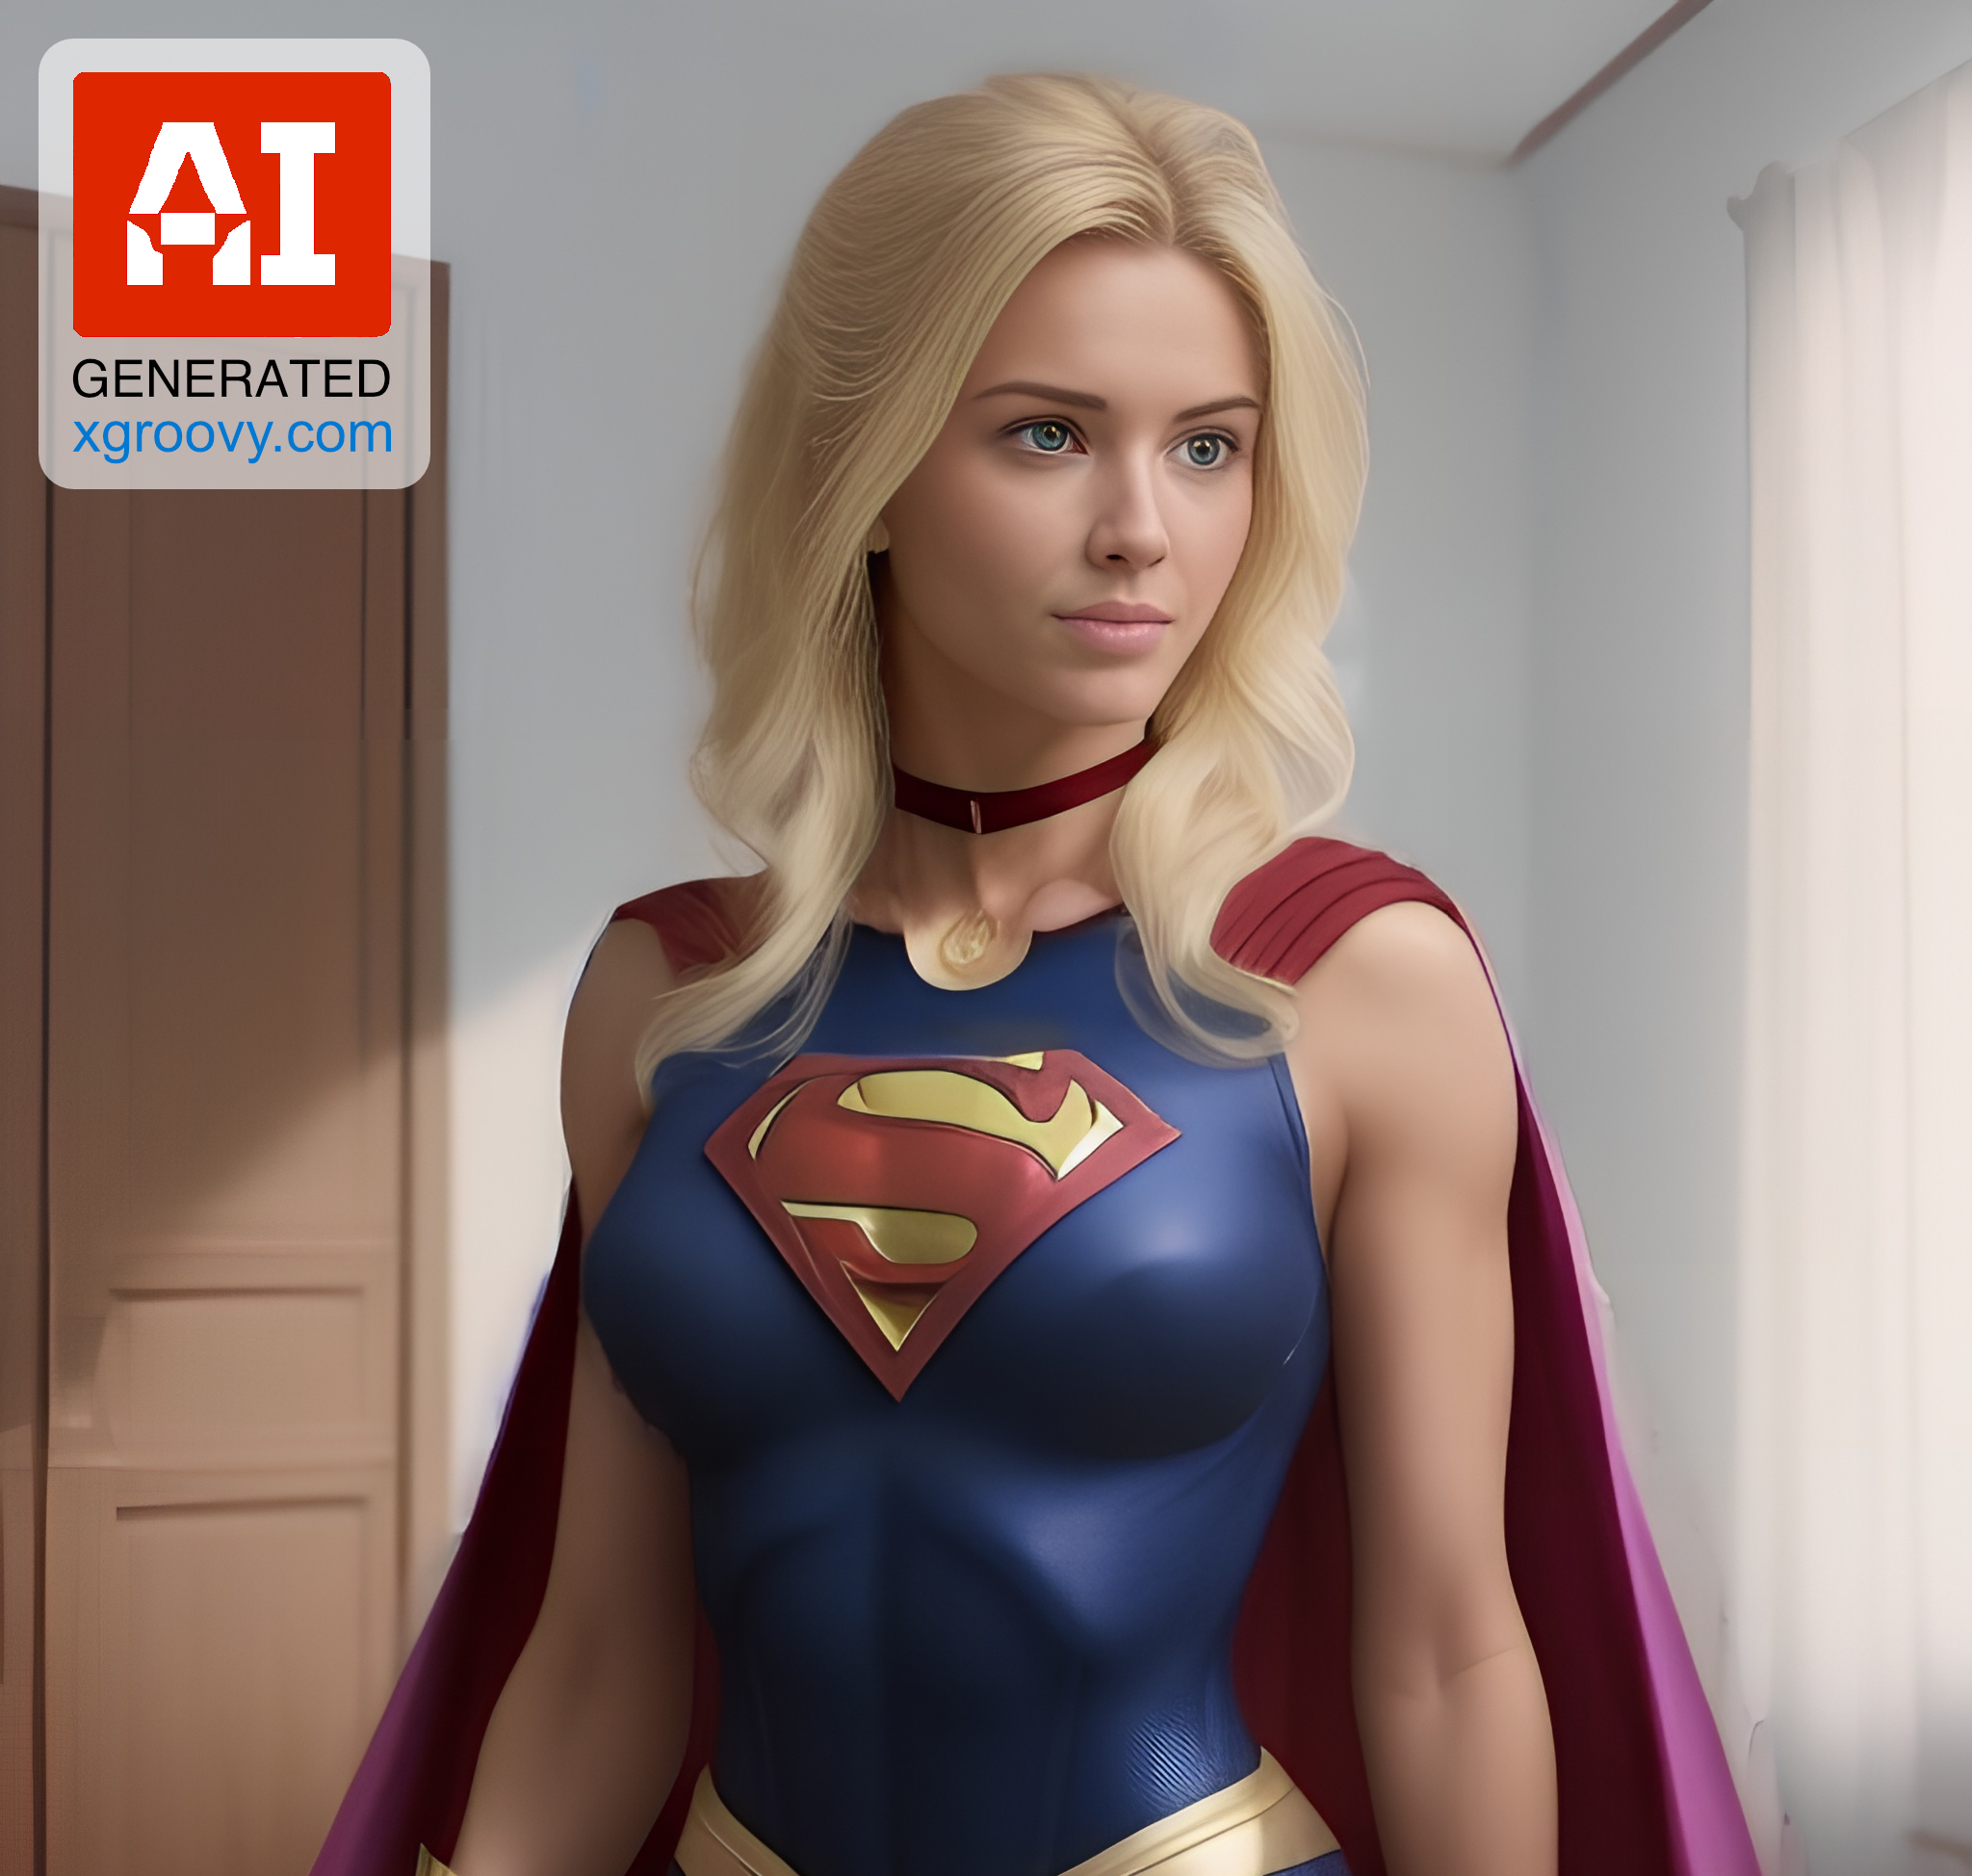 Supergirl Body Paint Porn - She's a naughty sorority girl, skinny and beautiful, with perfect boobs and  a choker. She's in